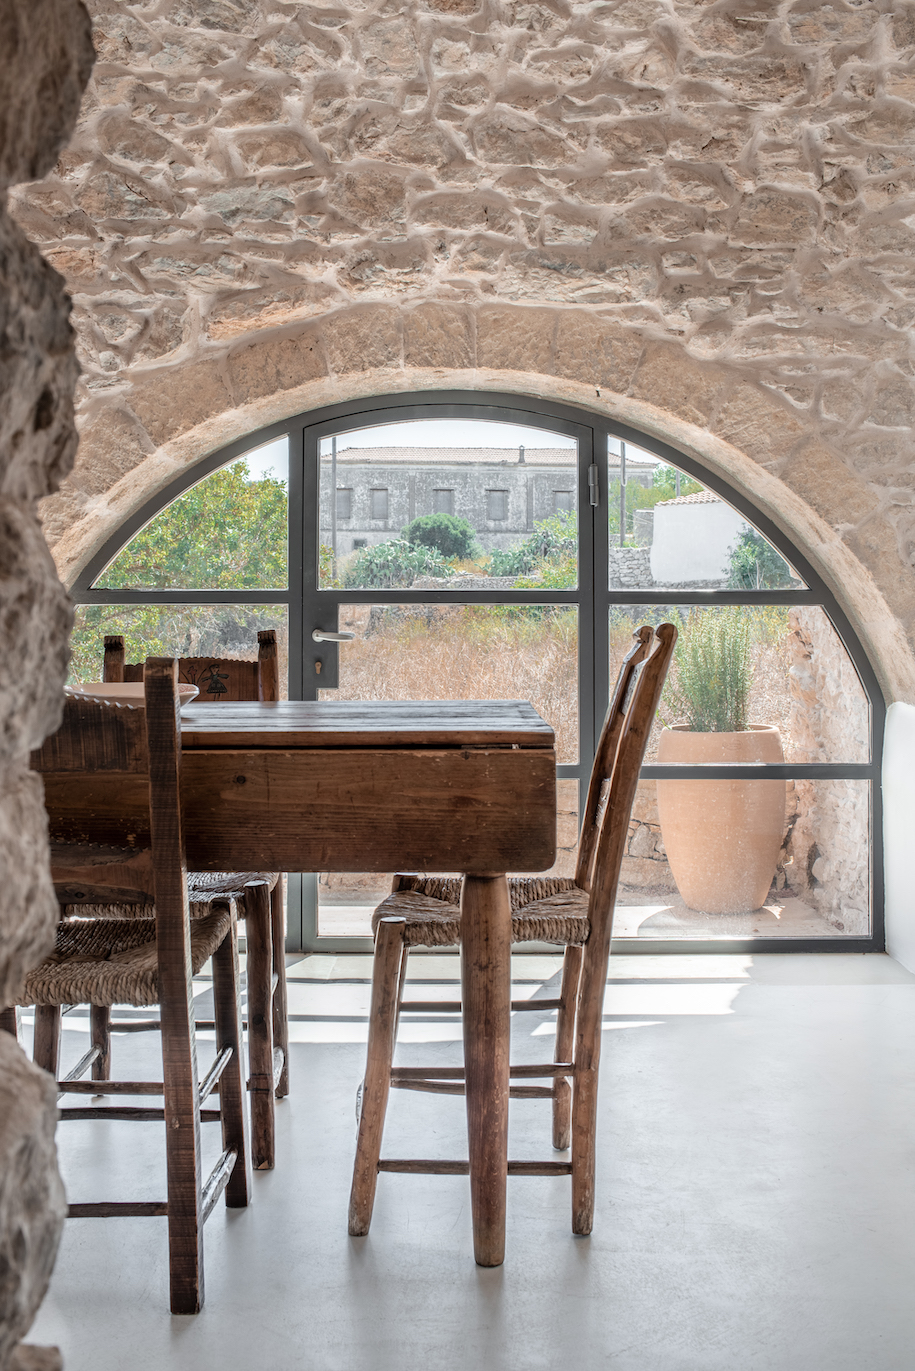 Archisearch Renovation of the monolithic Aroni Farmhouse by RCTECH